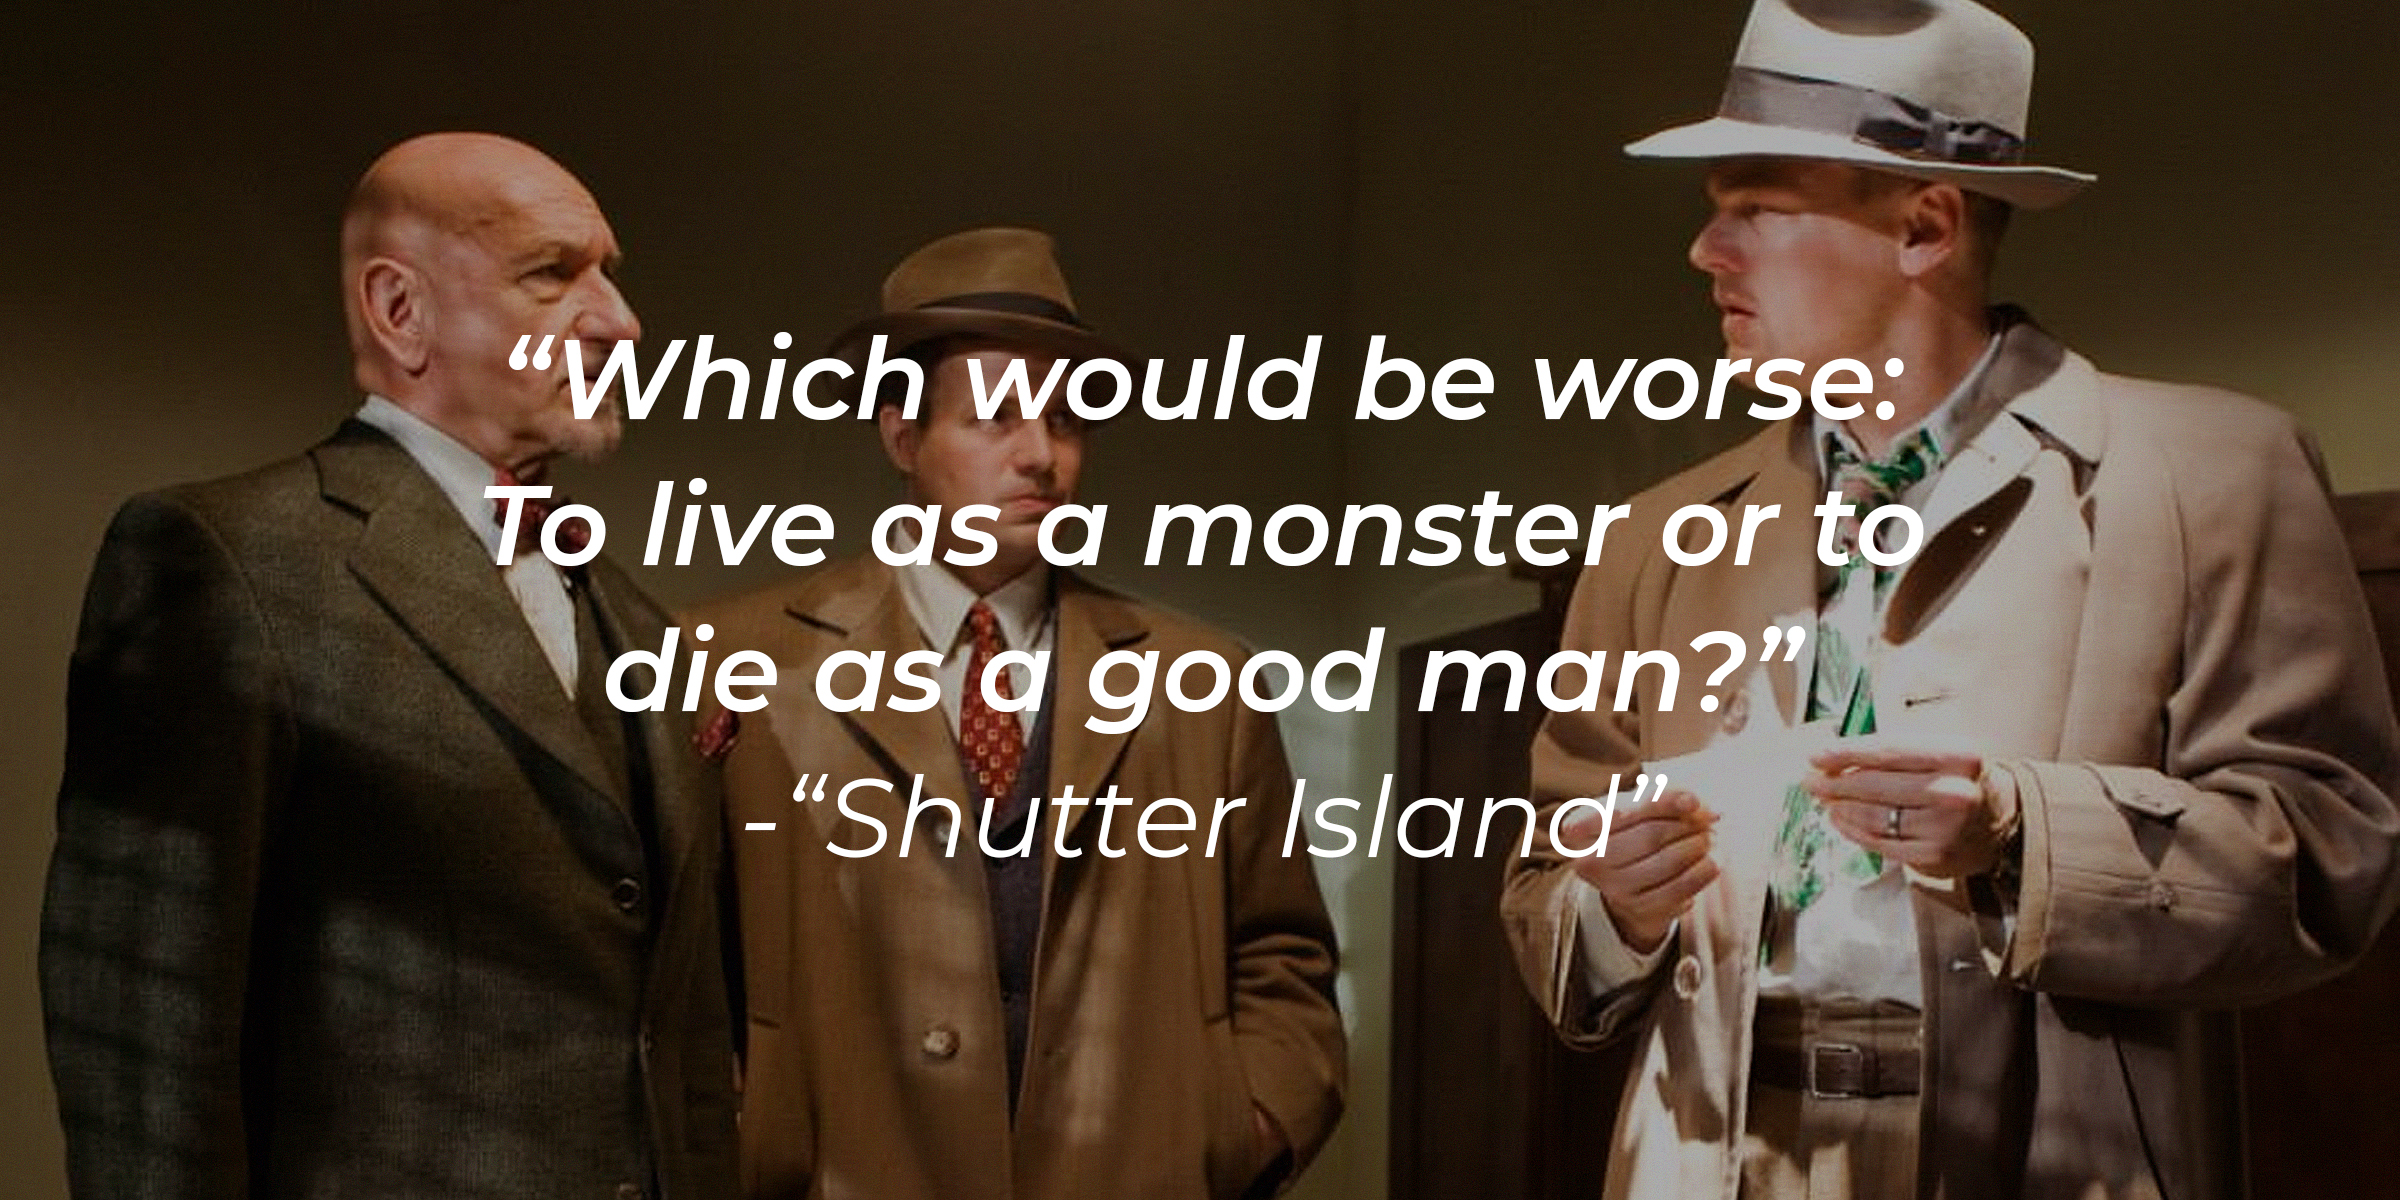 An image of Dr. John Cawley, Chuck Aule, and Teddy Daniels from the film "Shutter Island" with the quote: "Which would be worse: To live as a monster or to die as a good man?" | Source: facebook.com/ShutterIsland